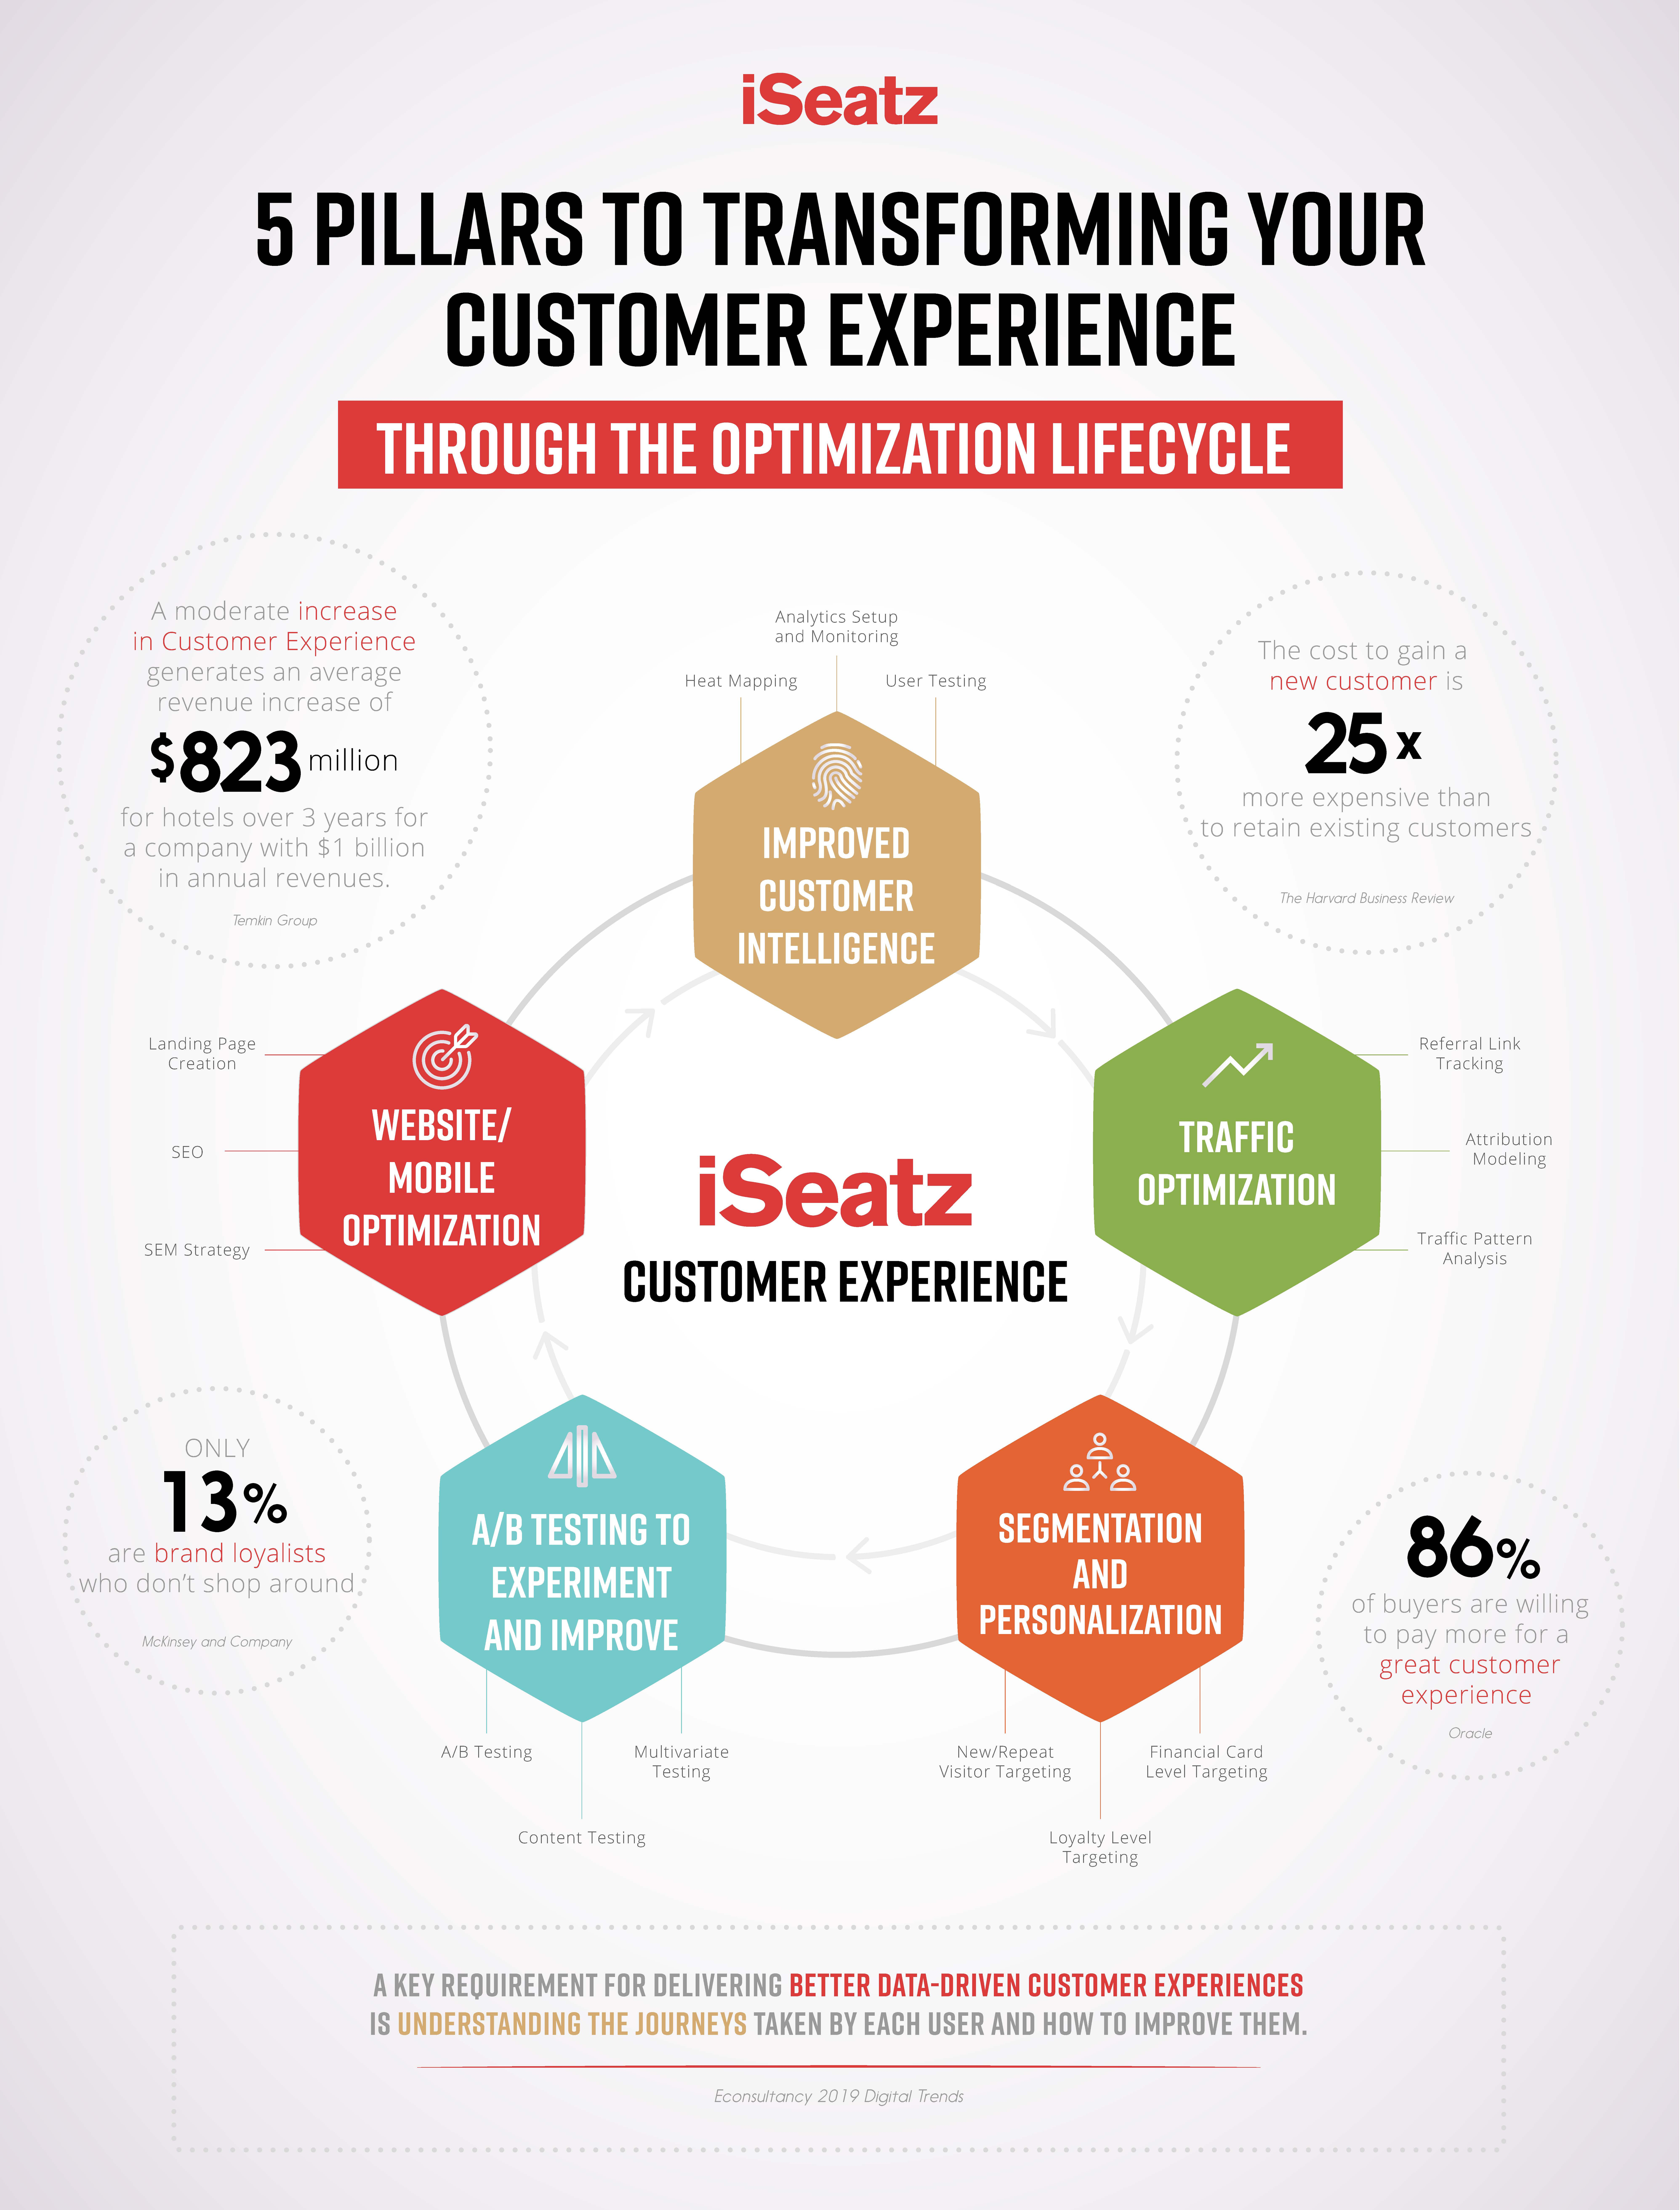 5 pillars to transforming your customer experience